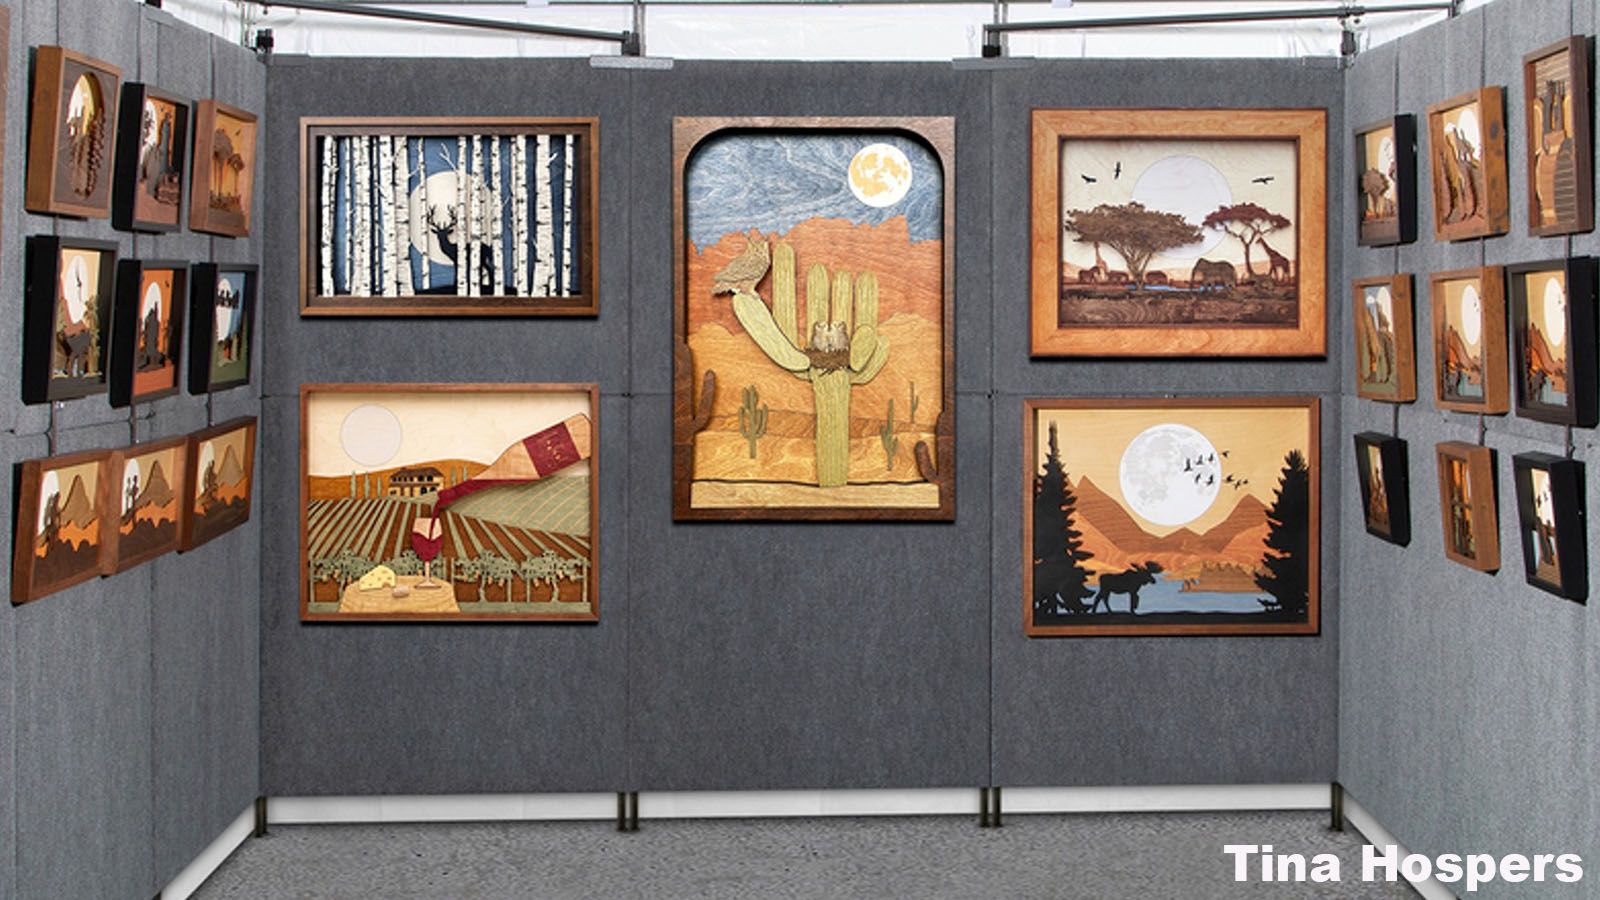 Artwork from Tina Hospers of Cutting Edge Wood Creations will be among those featured at the Covington Art Fair.